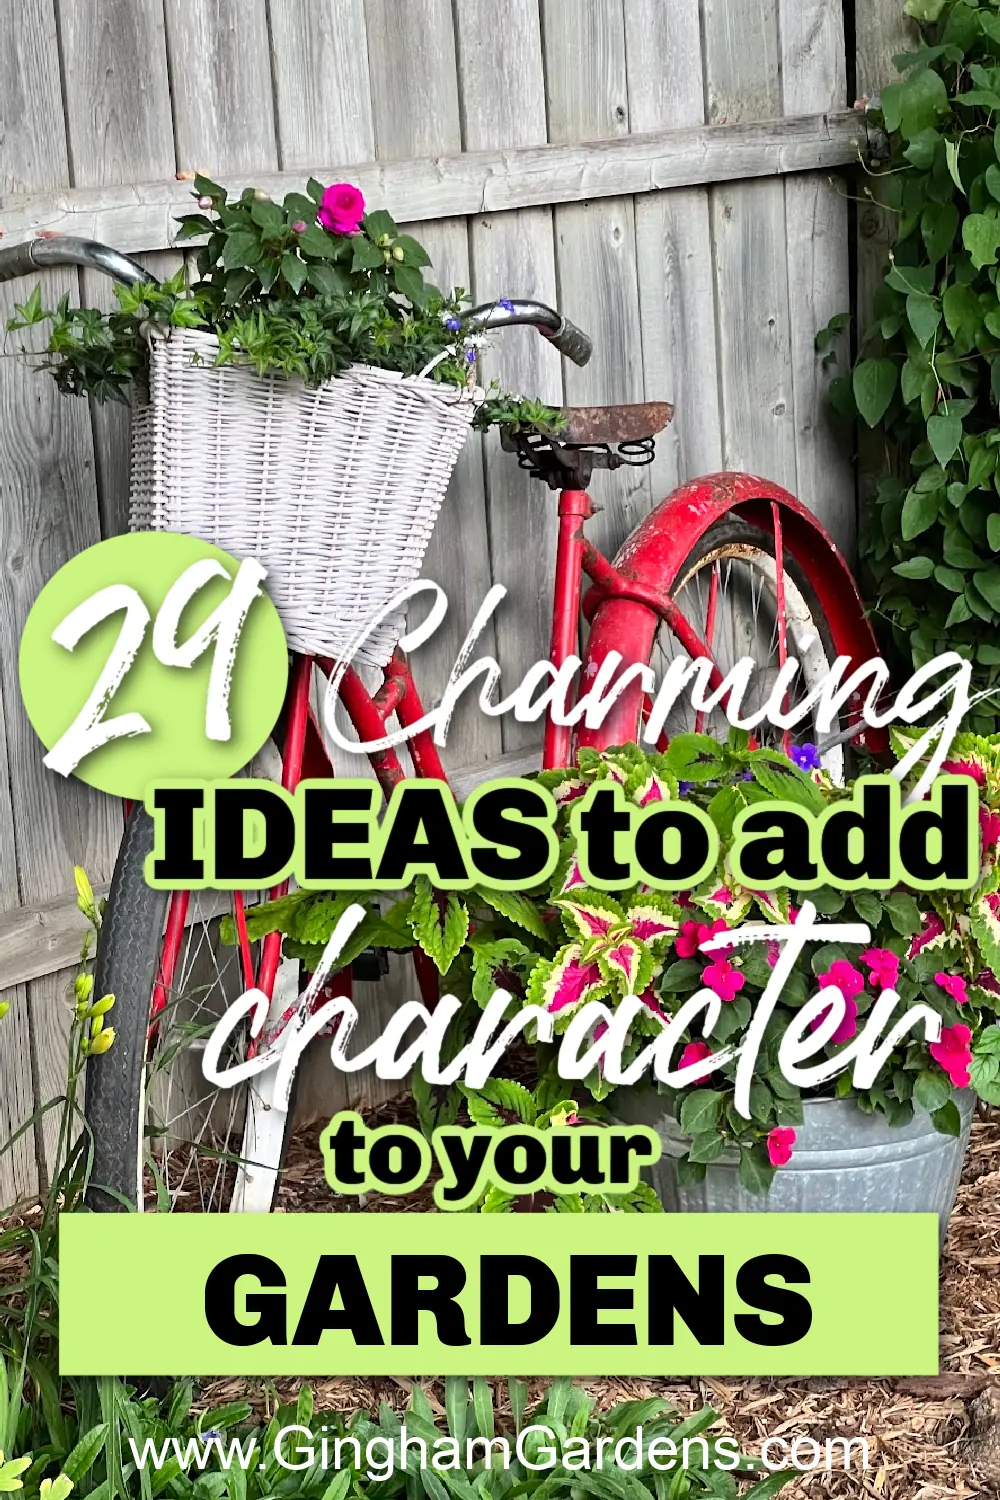 Image of a bicycle in a garden with text overlay - 29 Charming Ideas to add Character to your Garden